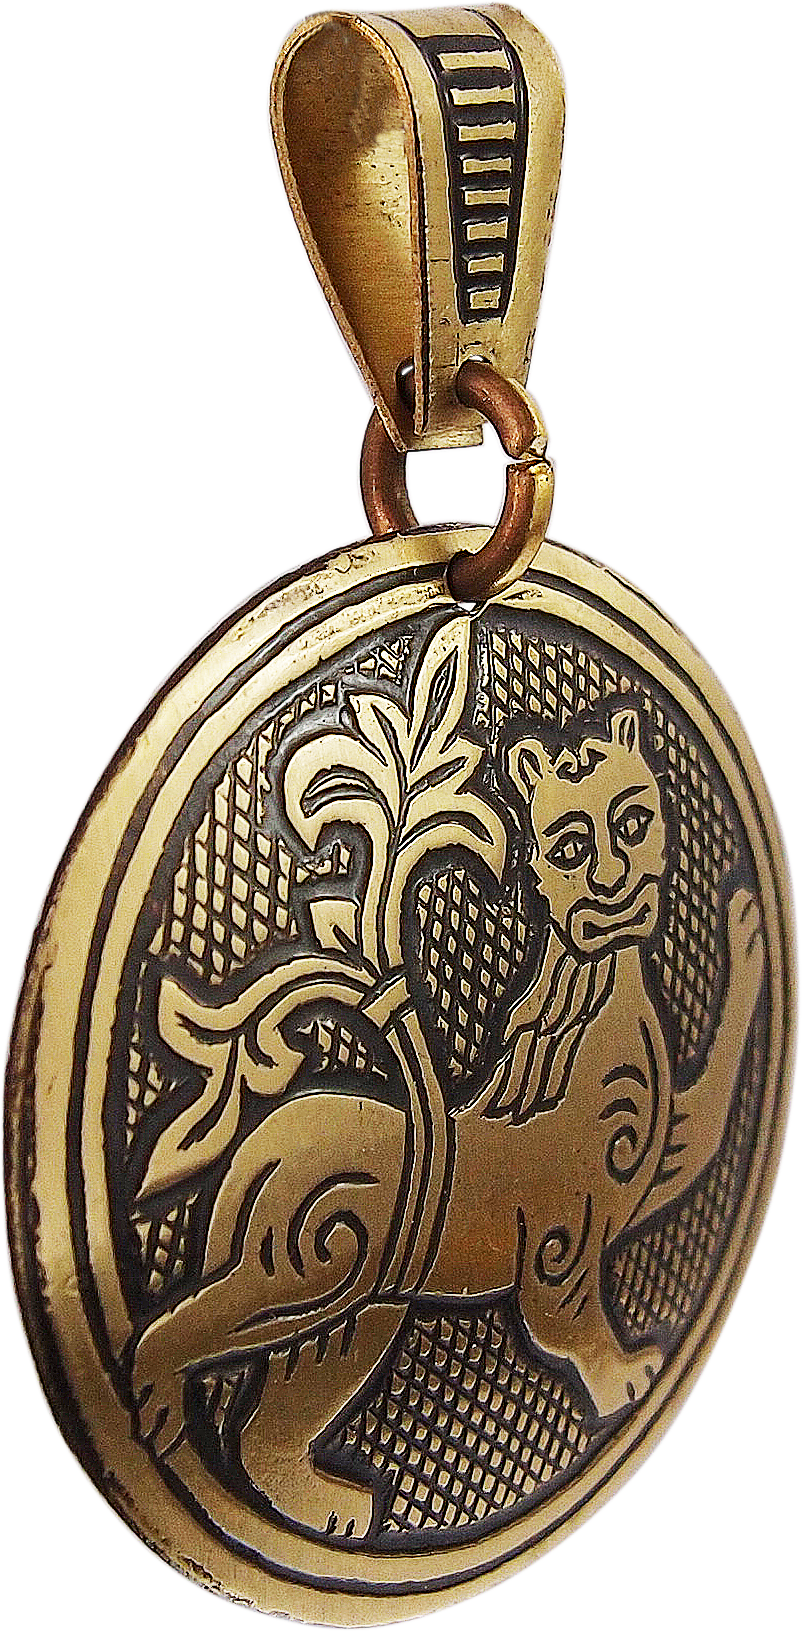 Pendant "Lion with a Thriving Tail"